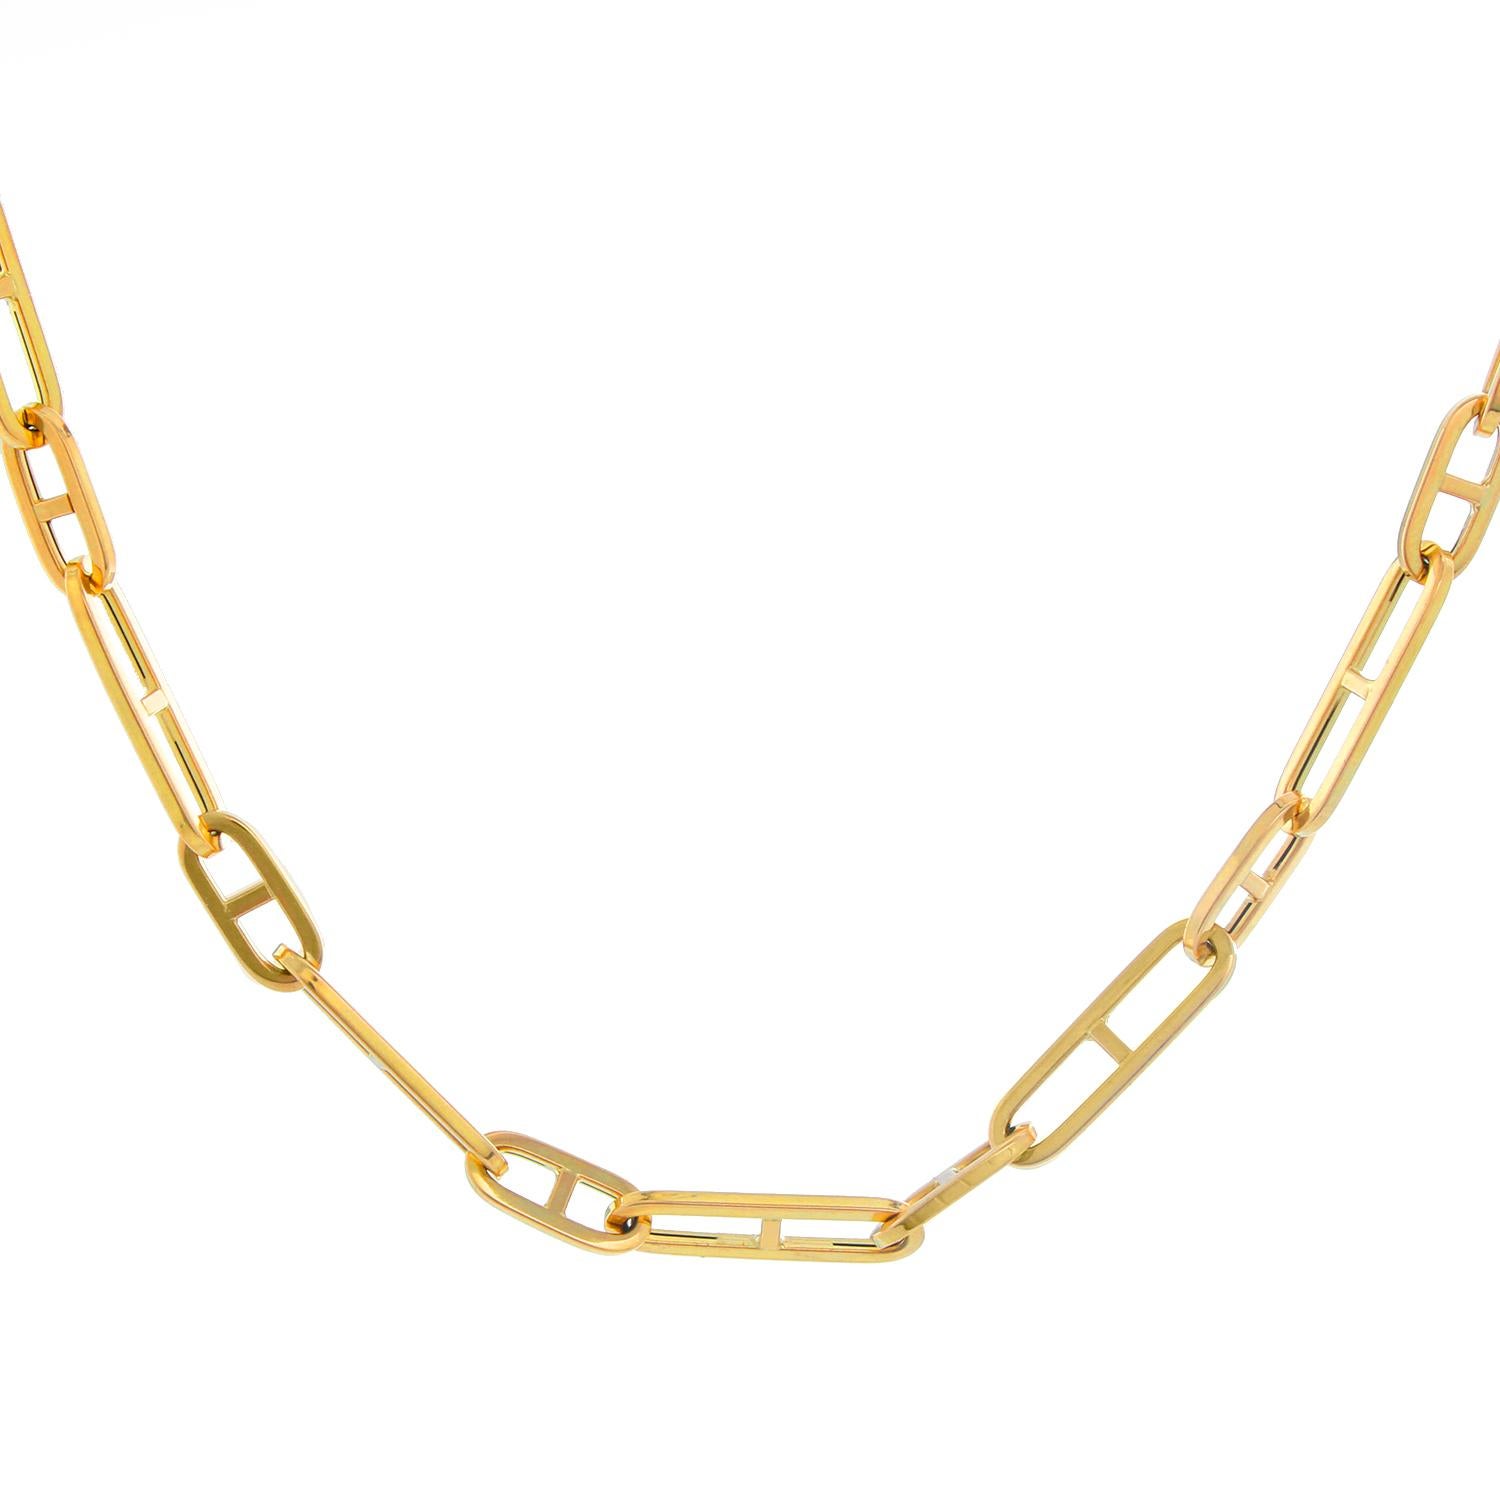 14K Yellow Gold Mariner Link with Bar Chain Necklace 30 Inches  - 14K Yellow gold hollow mariner link with bar necklace. Length size 30 inches. Can be sized down.  Perfect for layering or worn alone. Total weight 21.46 grams.